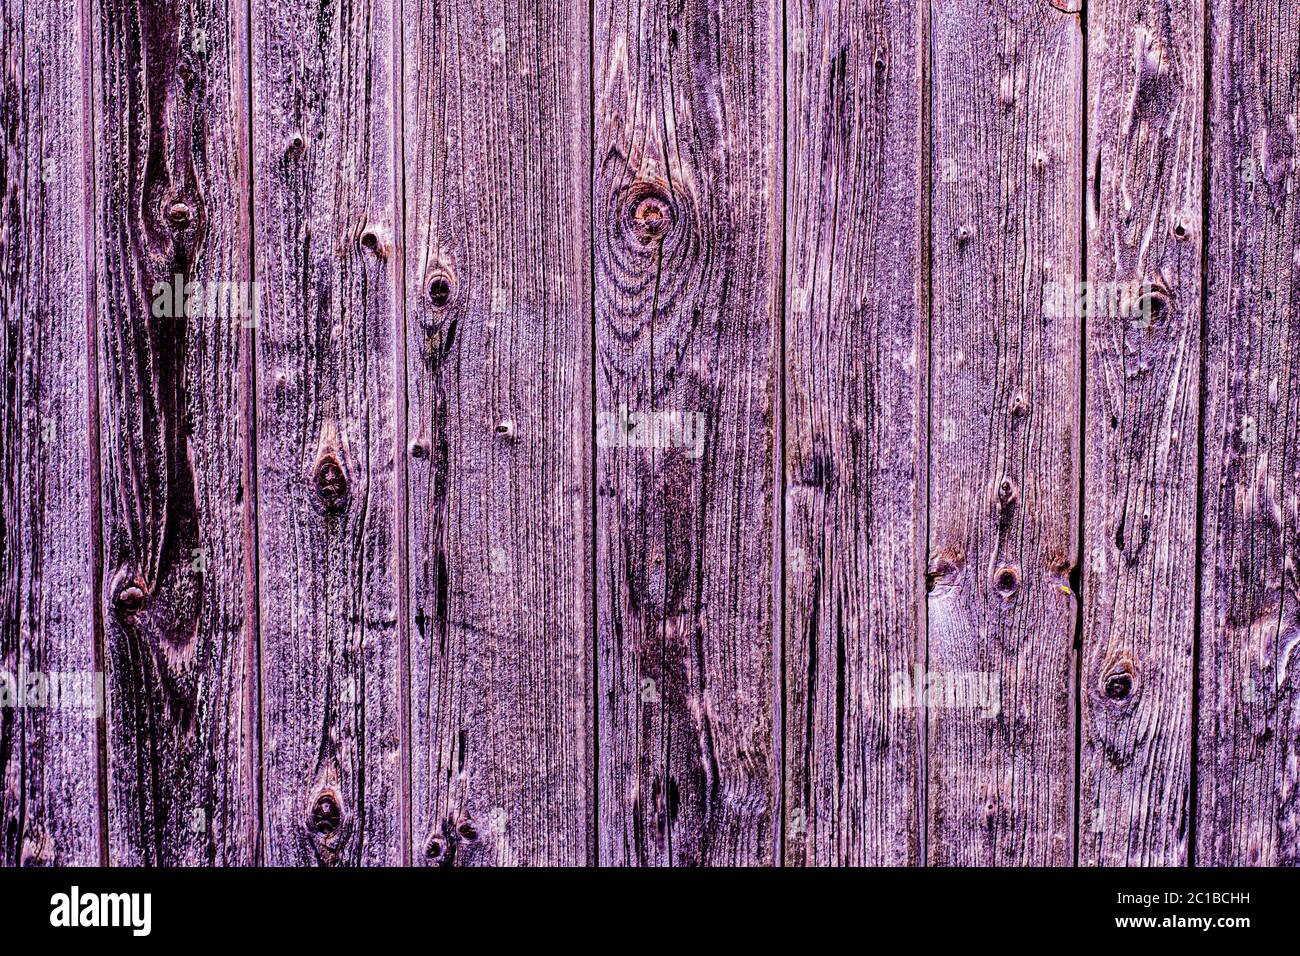 Violet or purple wooden weathered planks texture for background Stock Photo